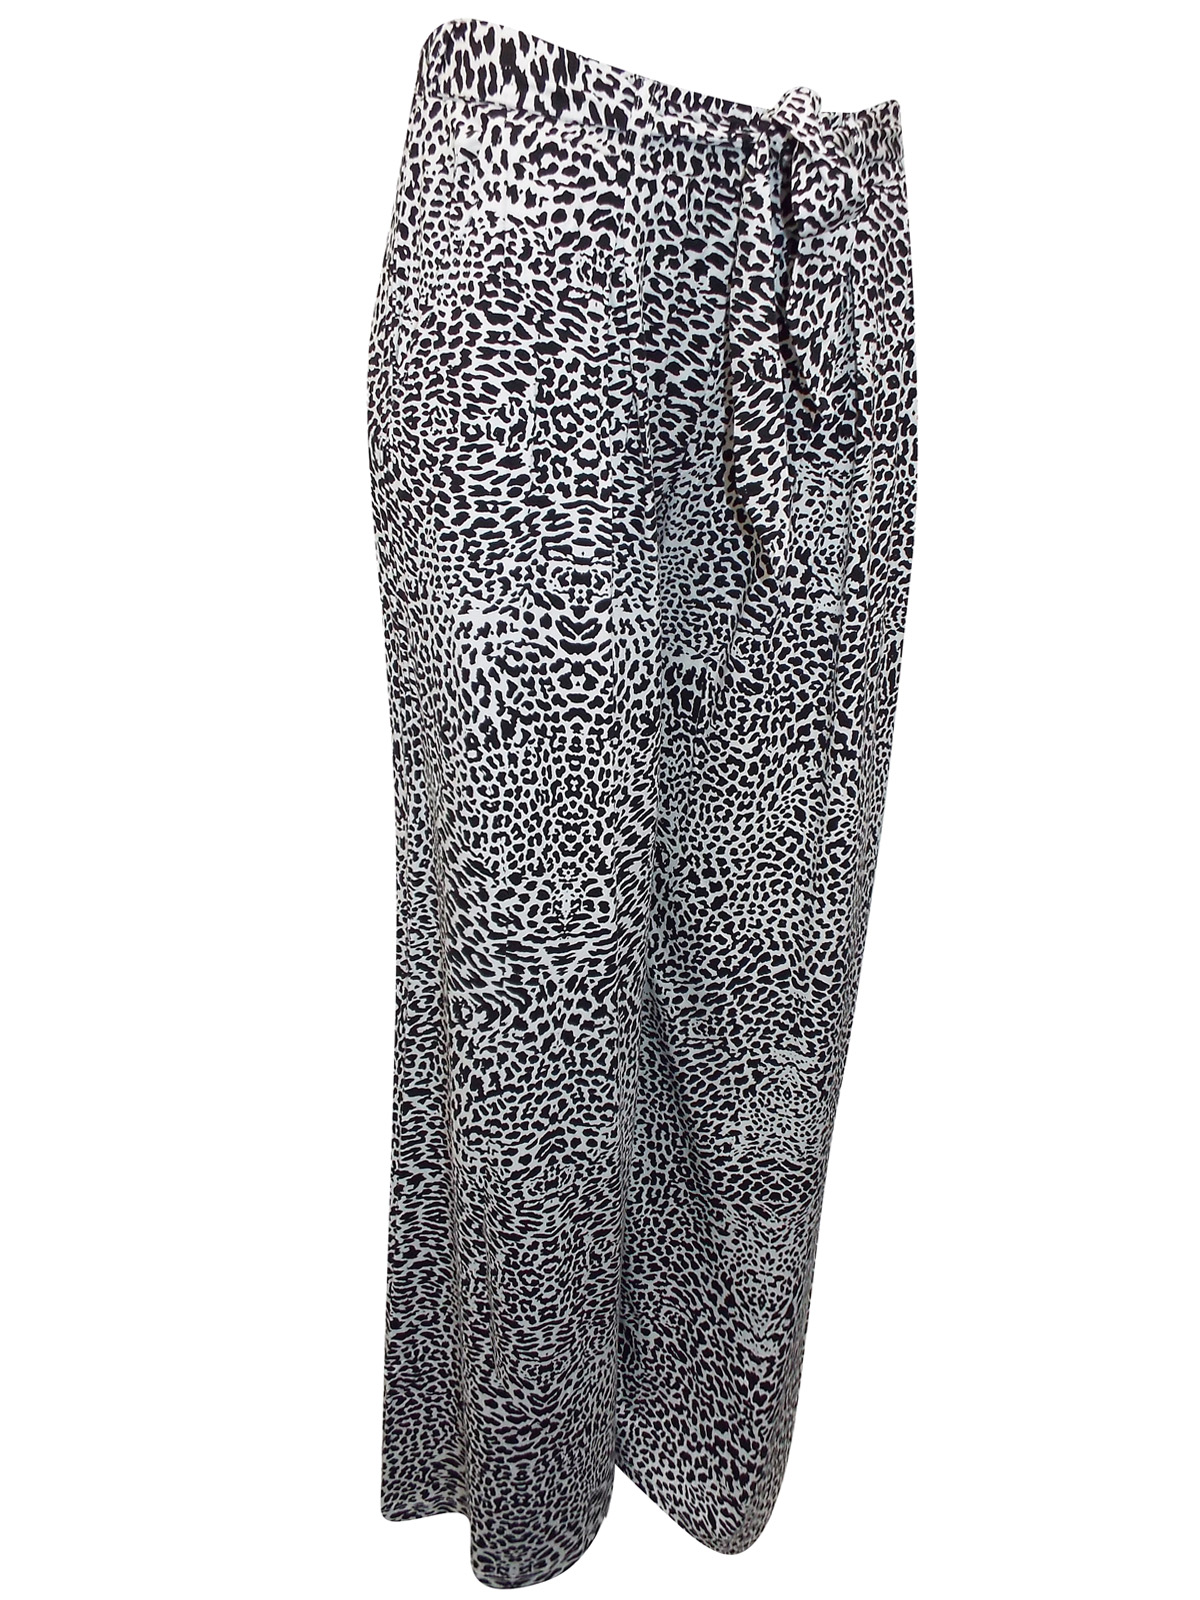 First Avenue BLACK Animal Print Belted Trousers - Size 10 to 20